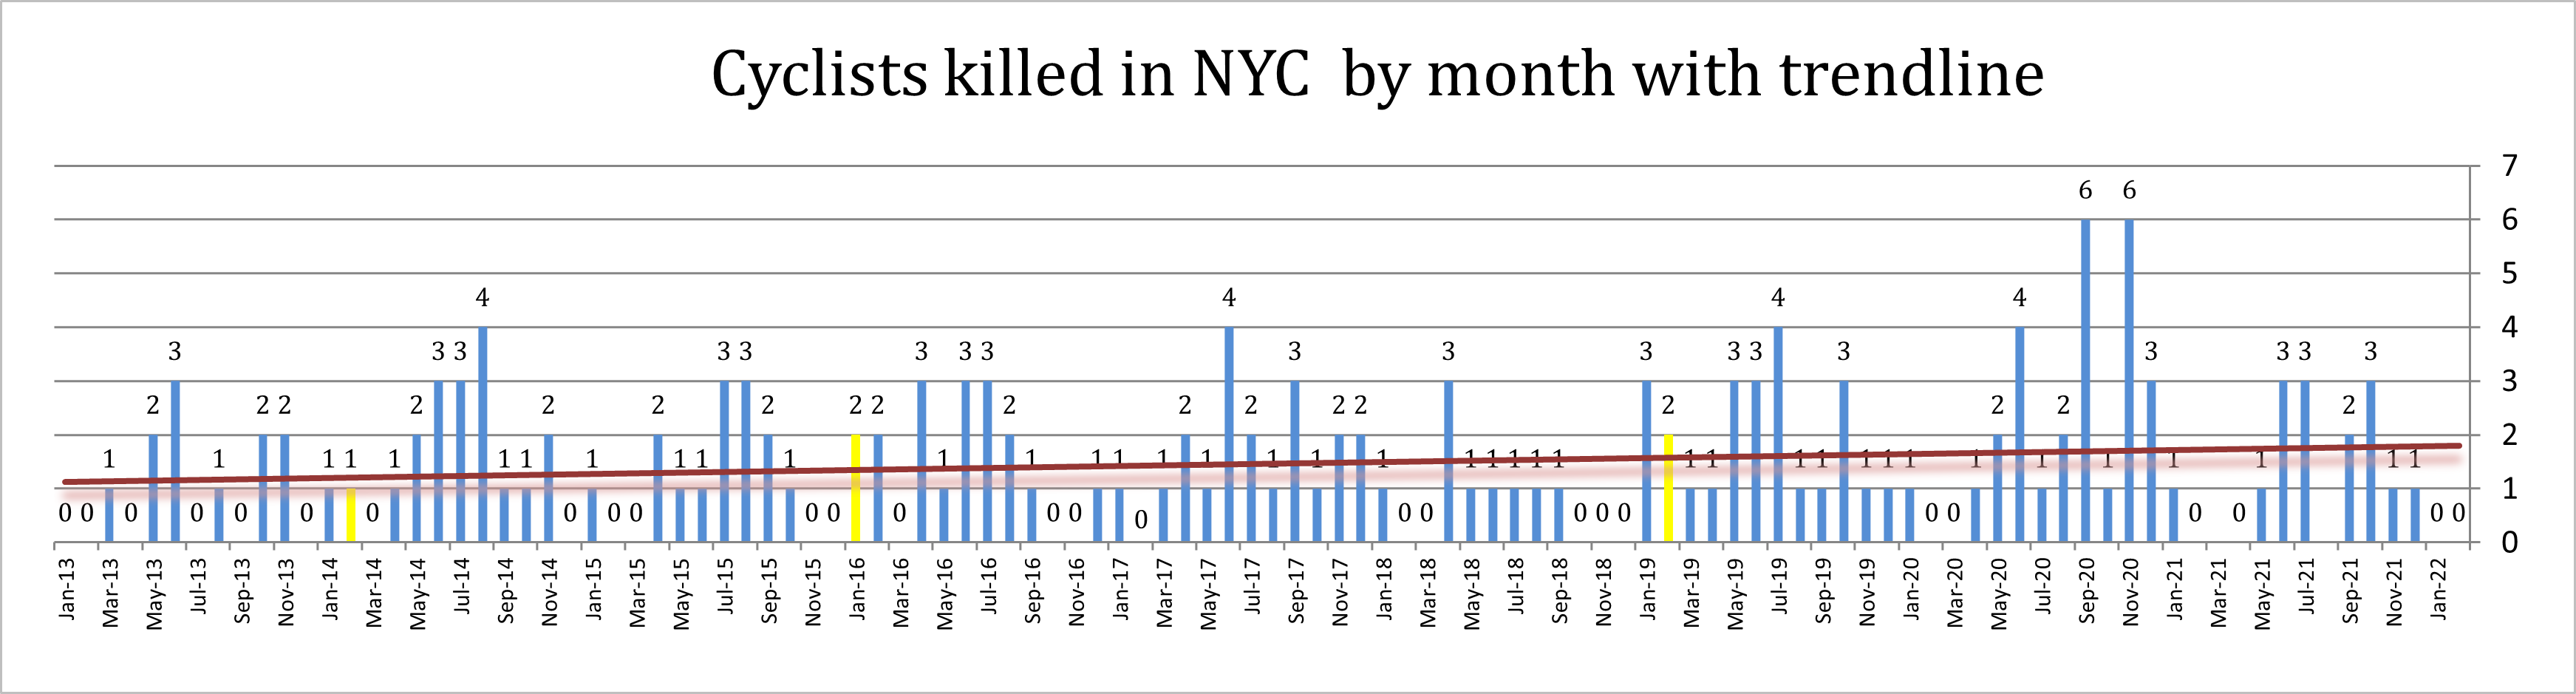 Bicycle accident fatalities NYC